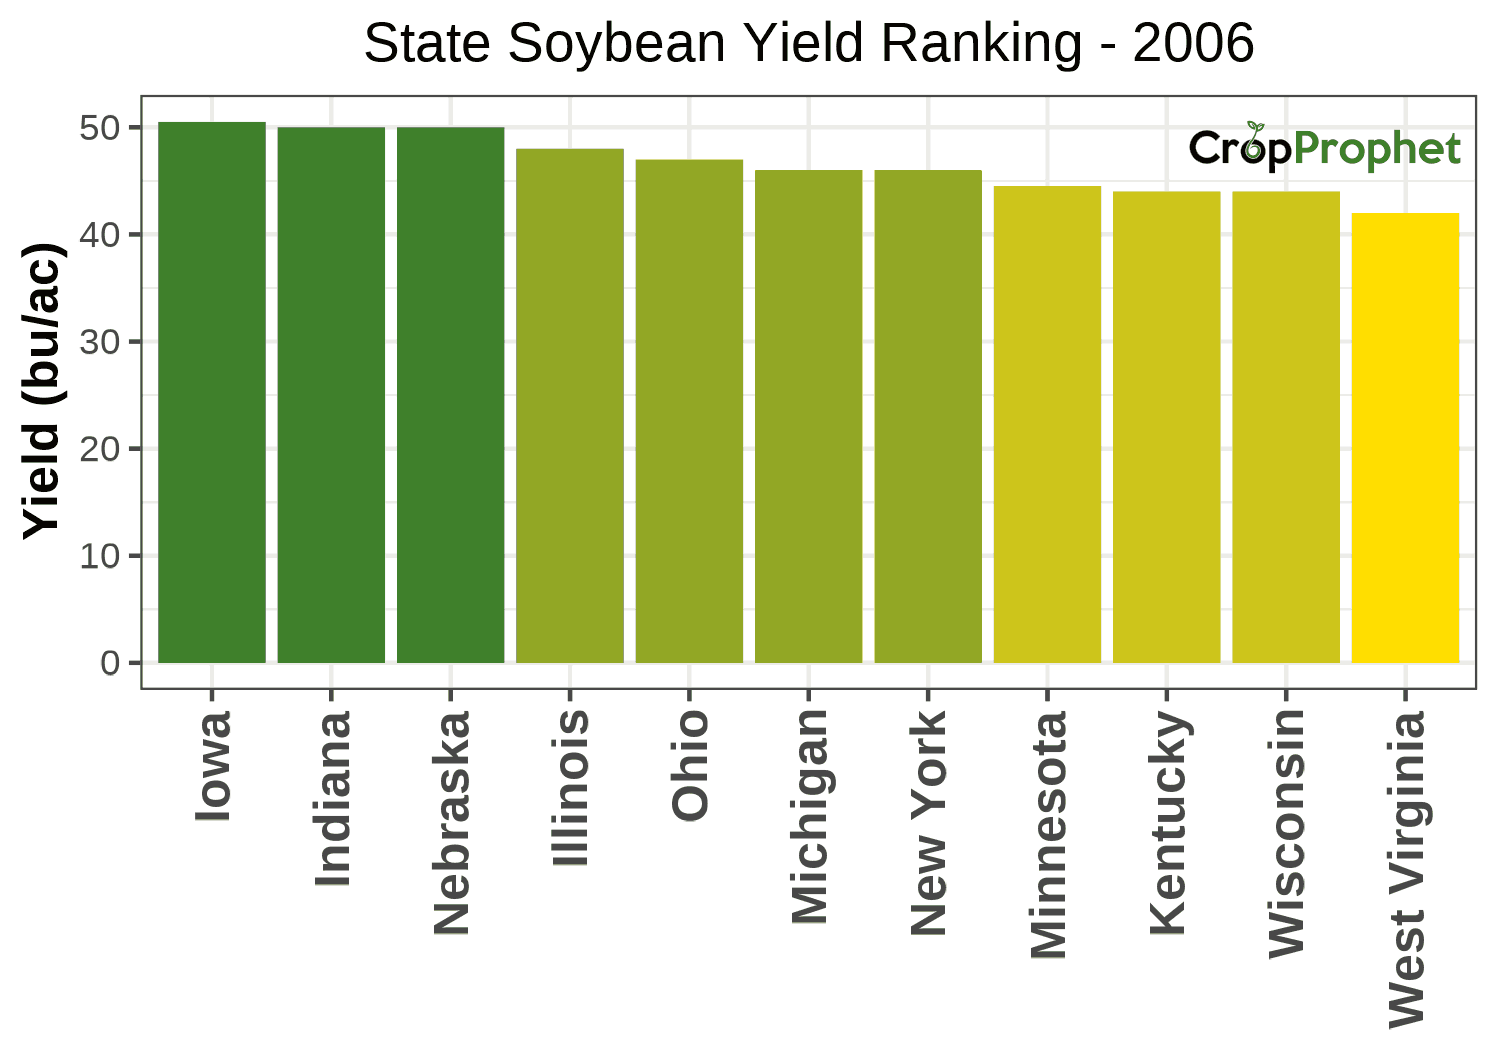 Soybean Production by State - 2006 Rankings